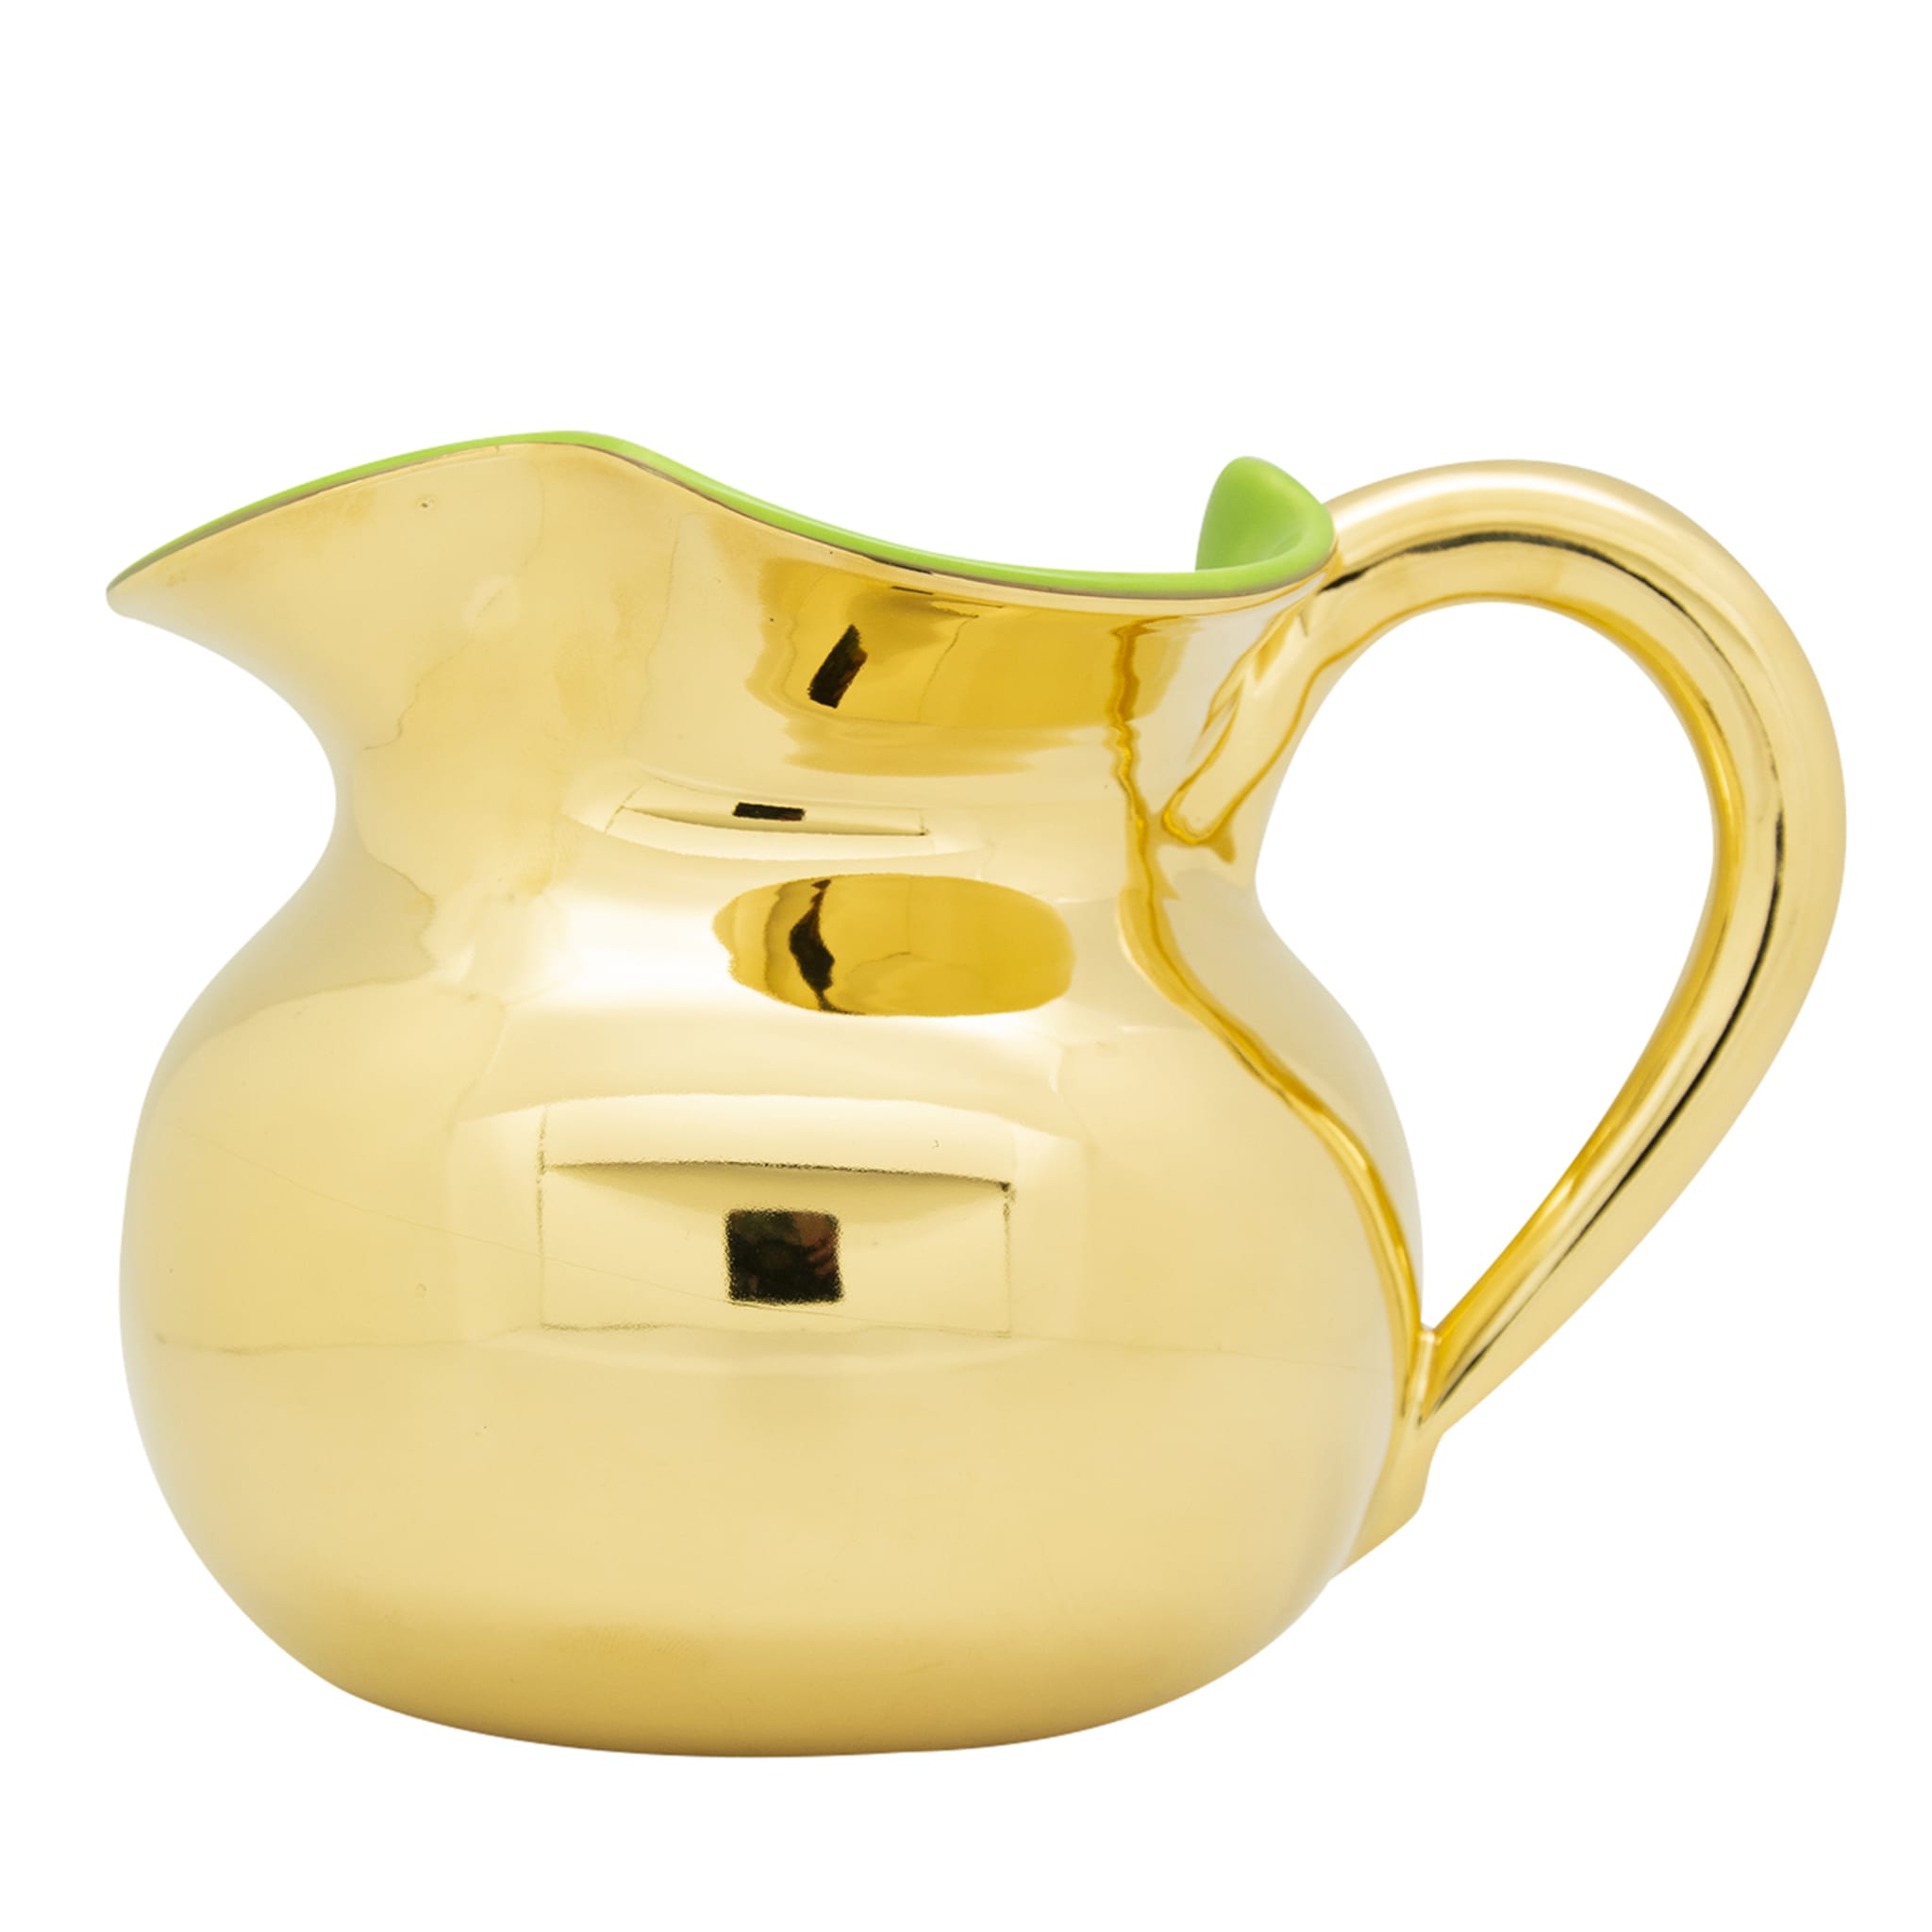 Torcello Gold & Green Carafe - Main view